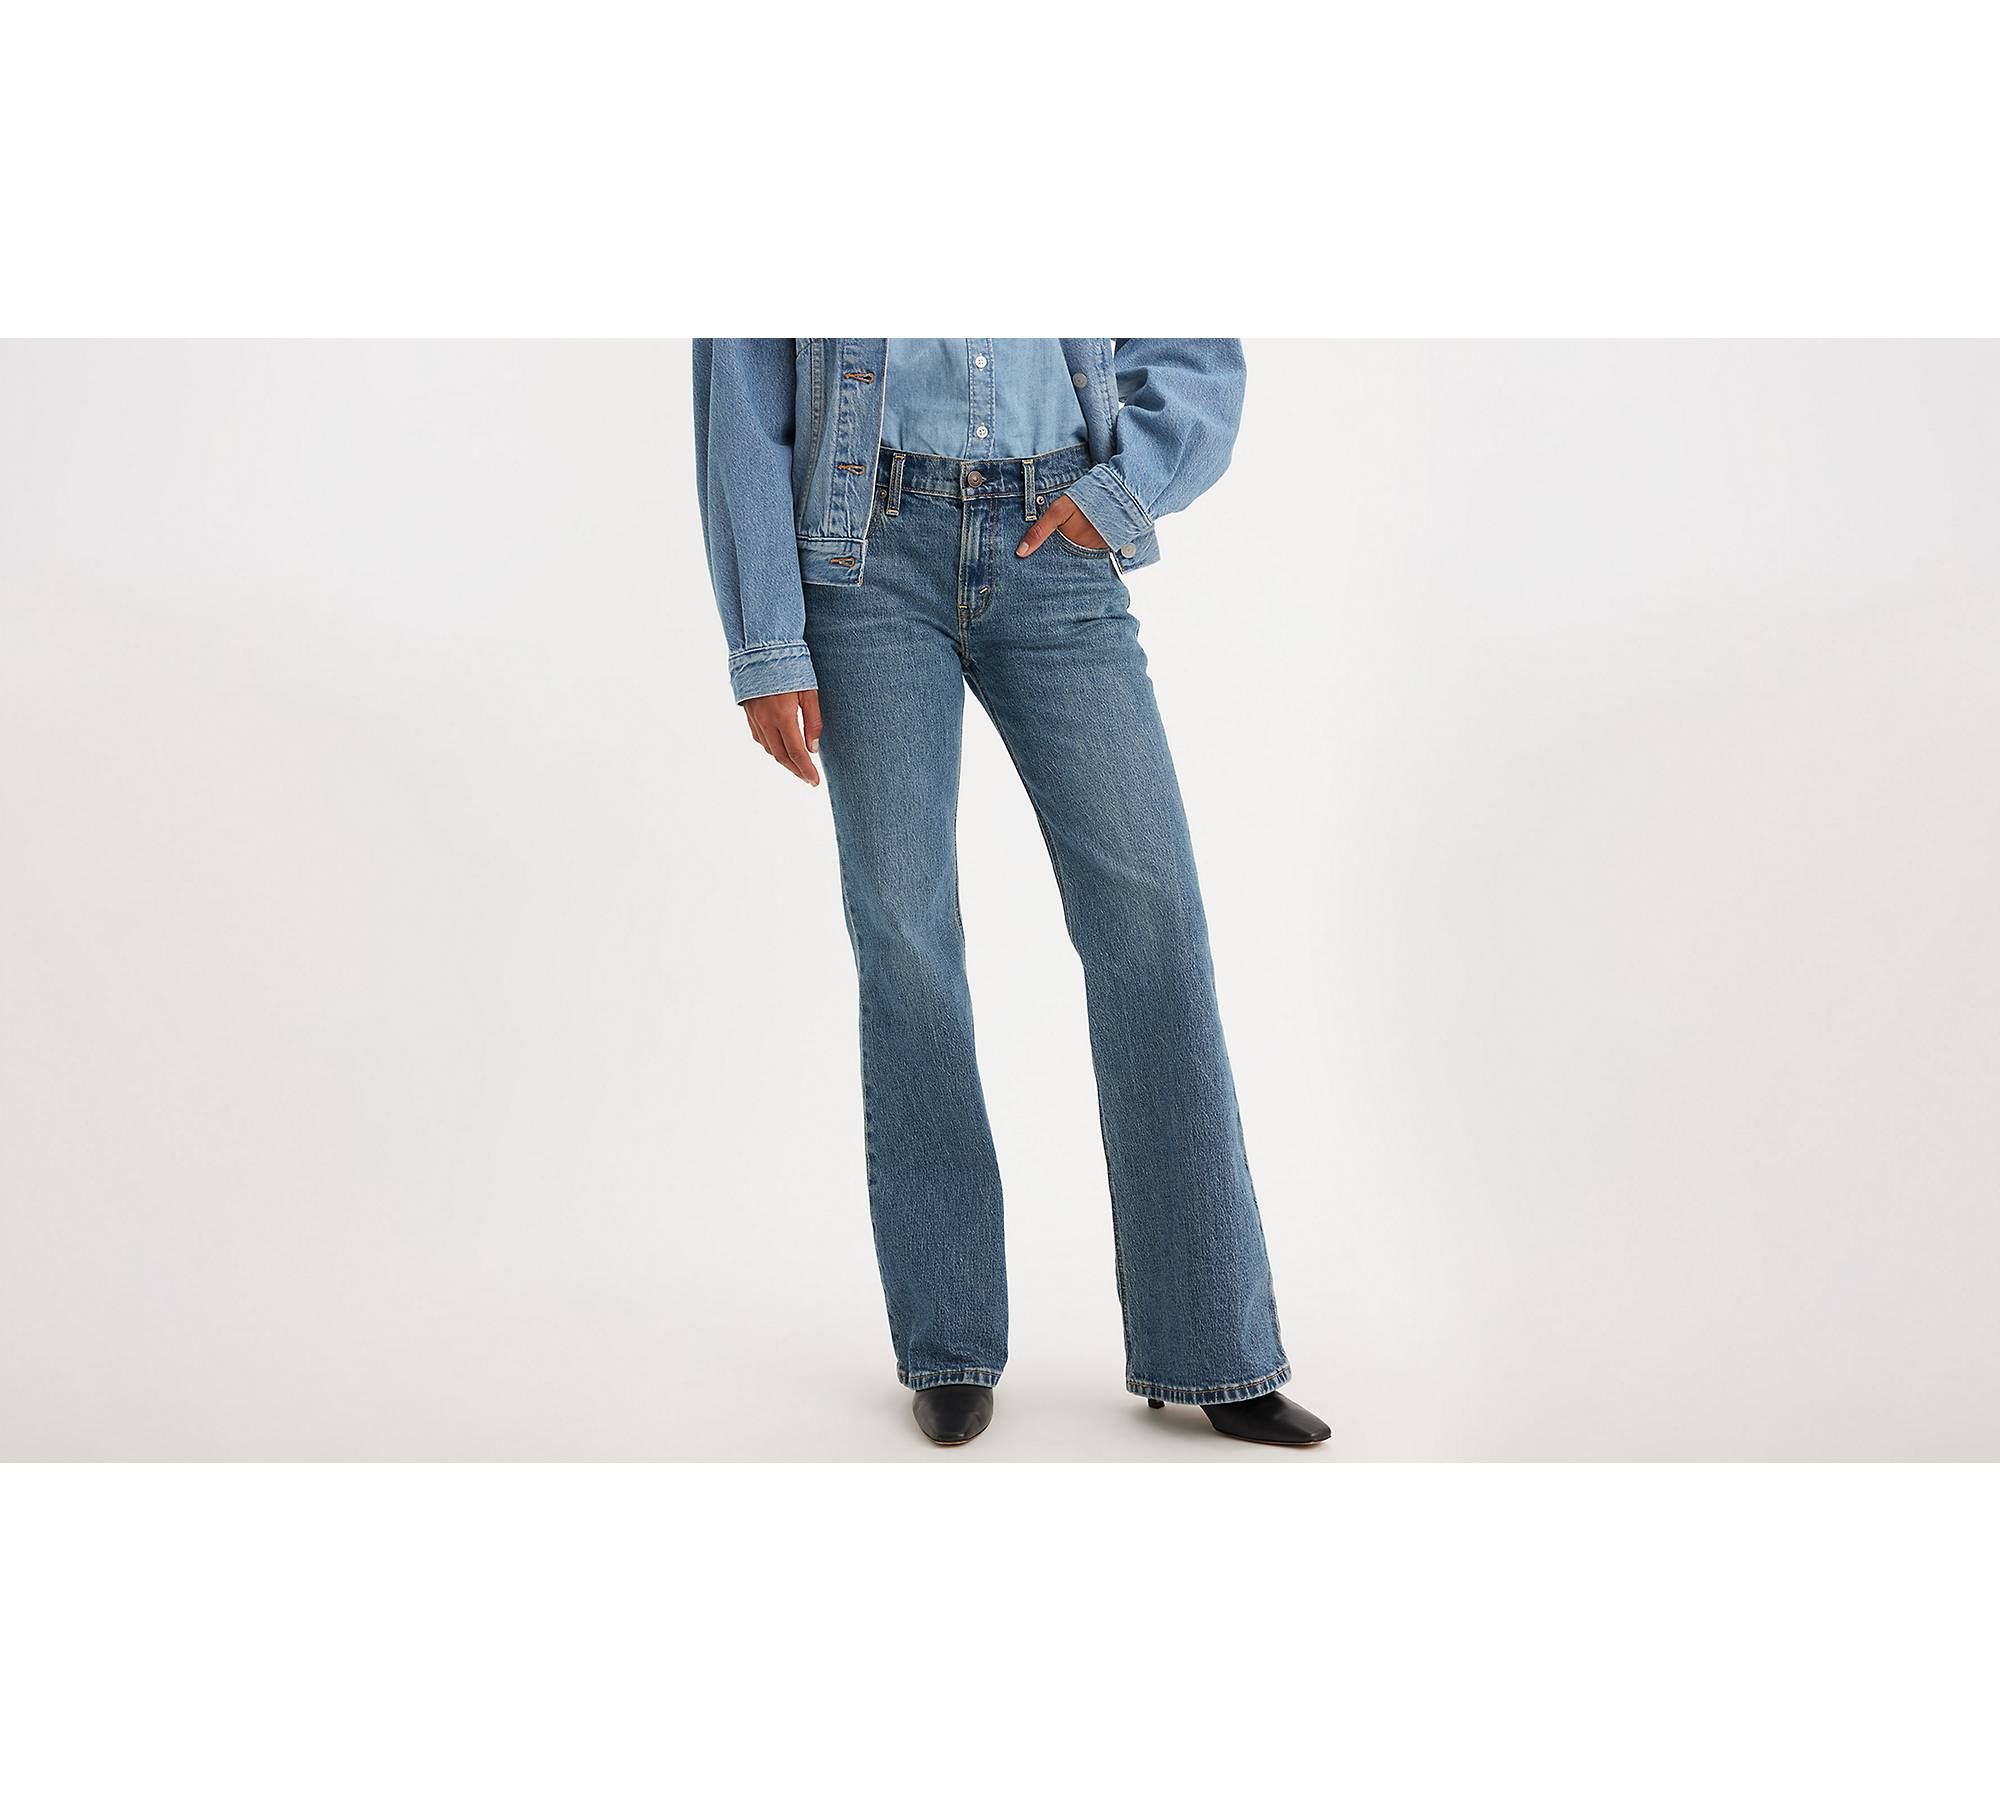 Middy Ankle Flare Women's Jeans - Dark Wash | Levi's® US